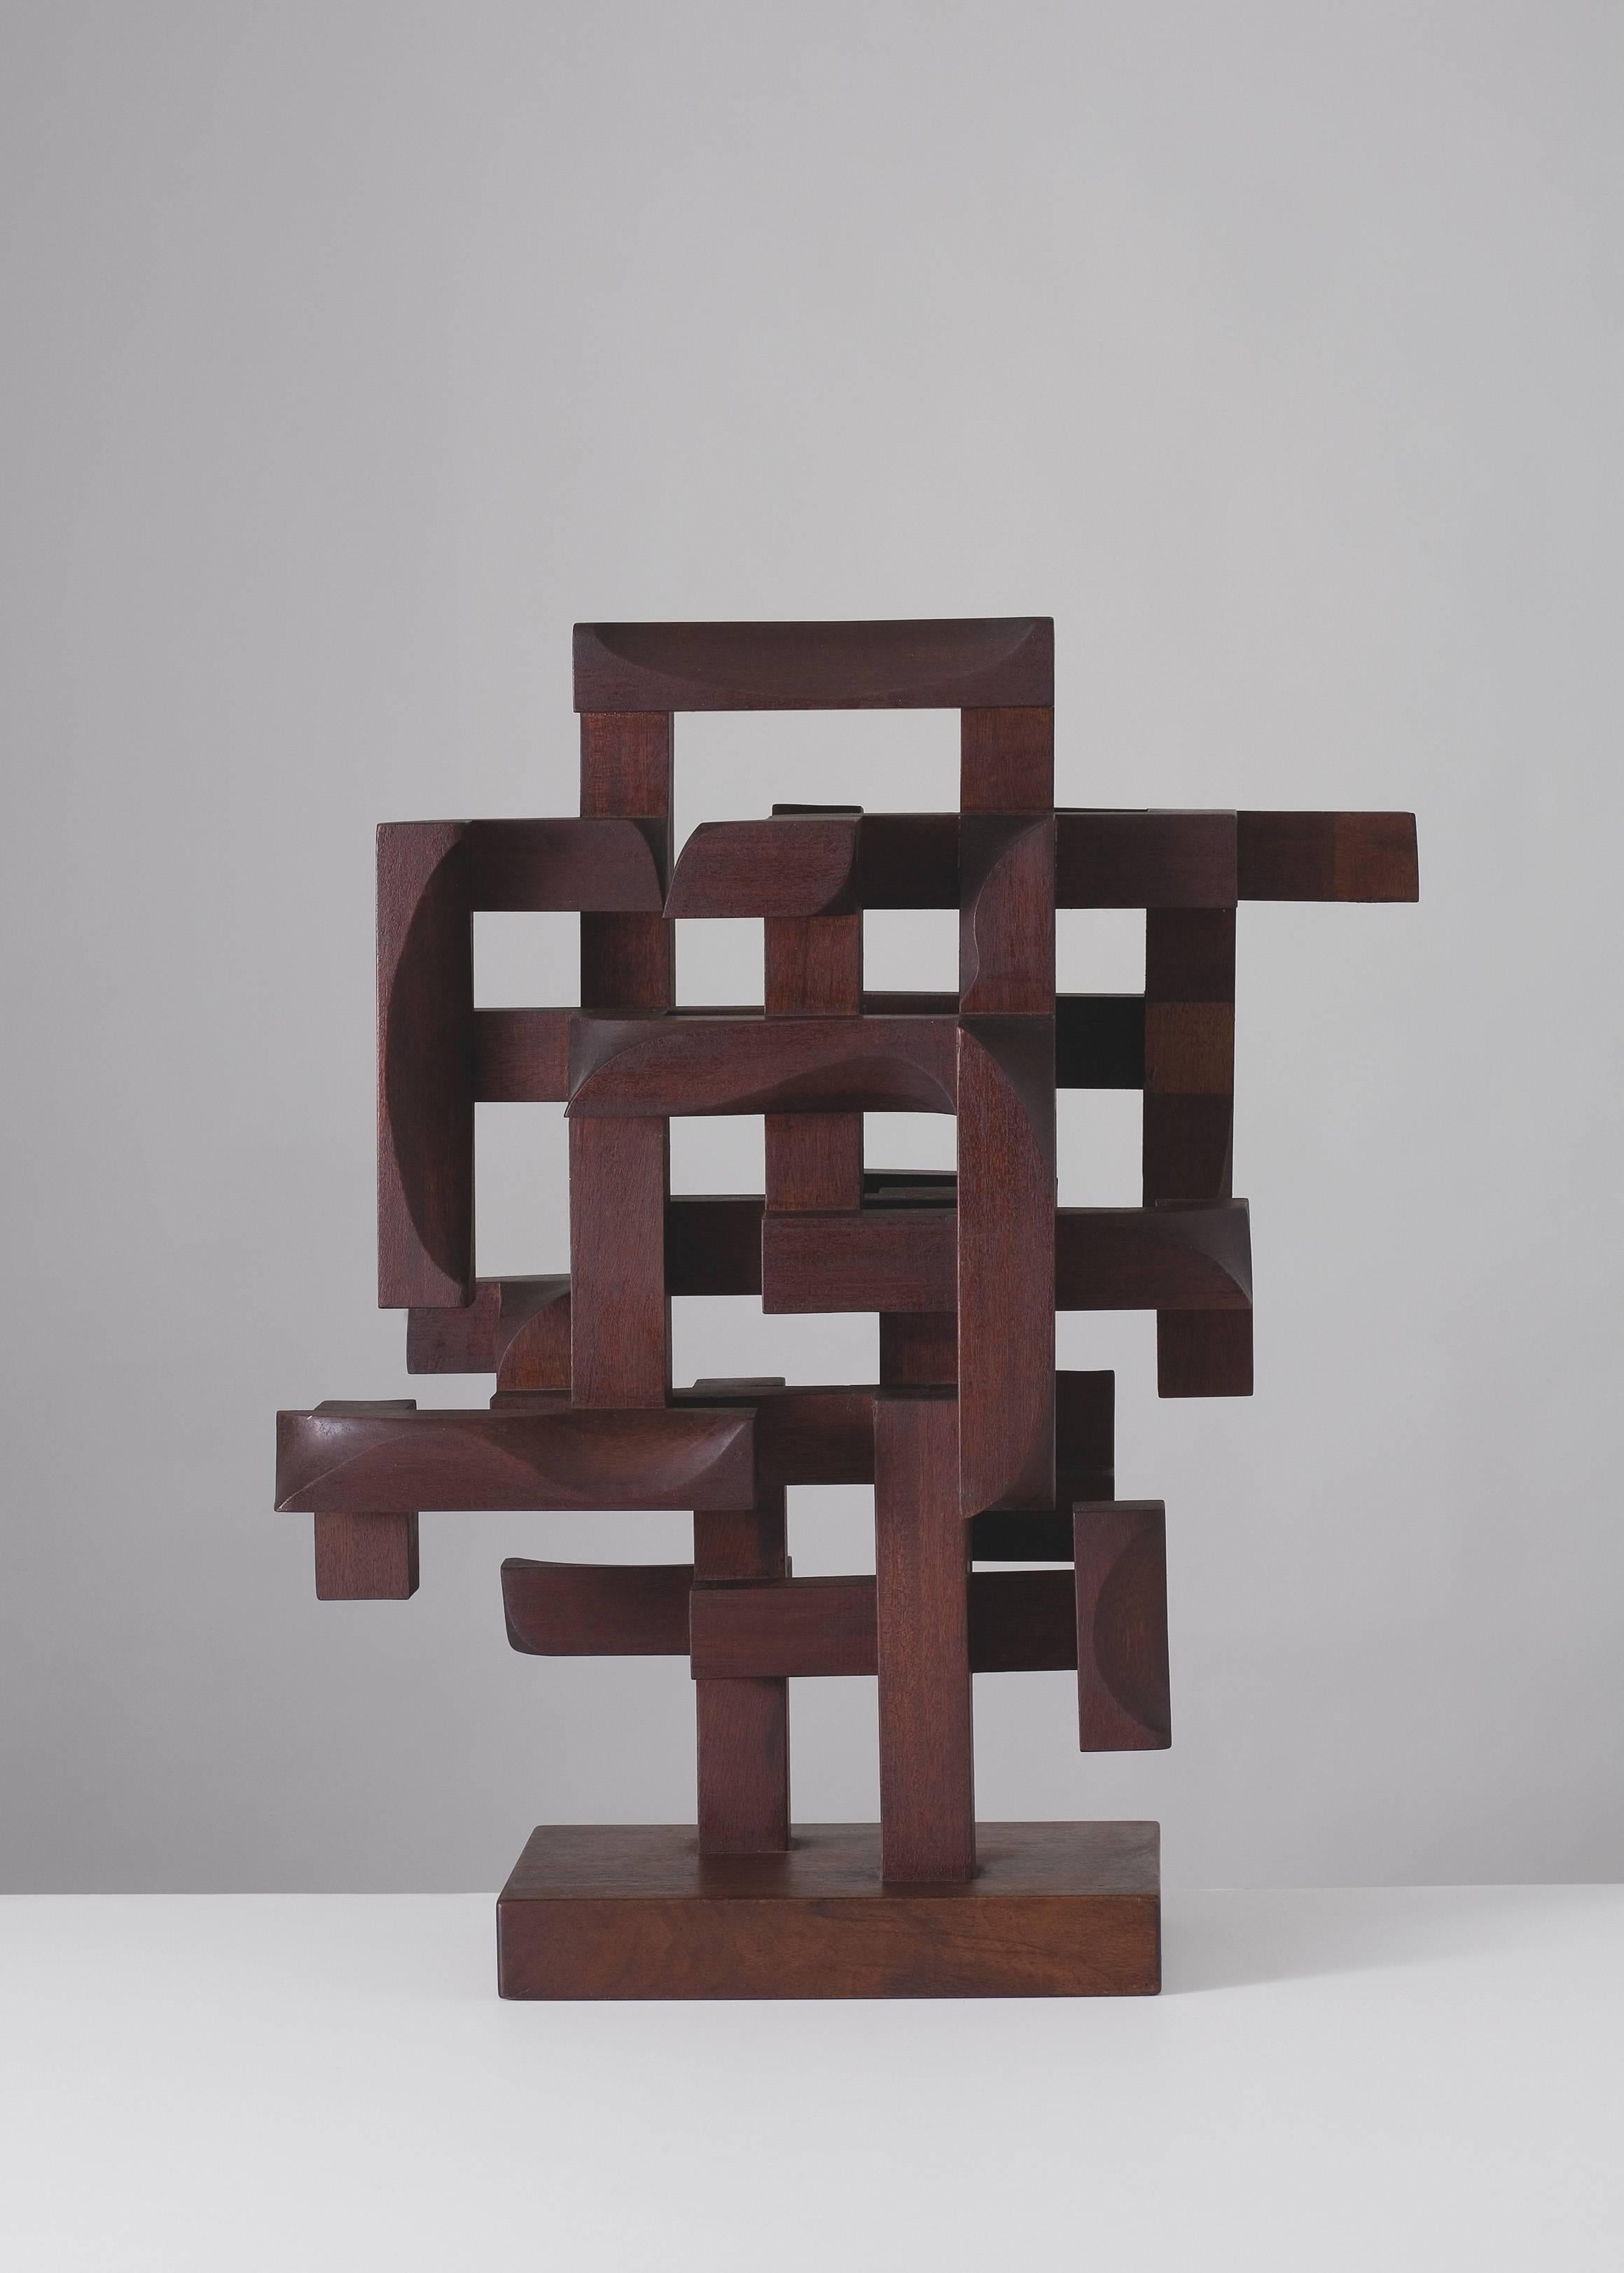 Abstract sculpture by Italian artist Mario Dal Fabbro.